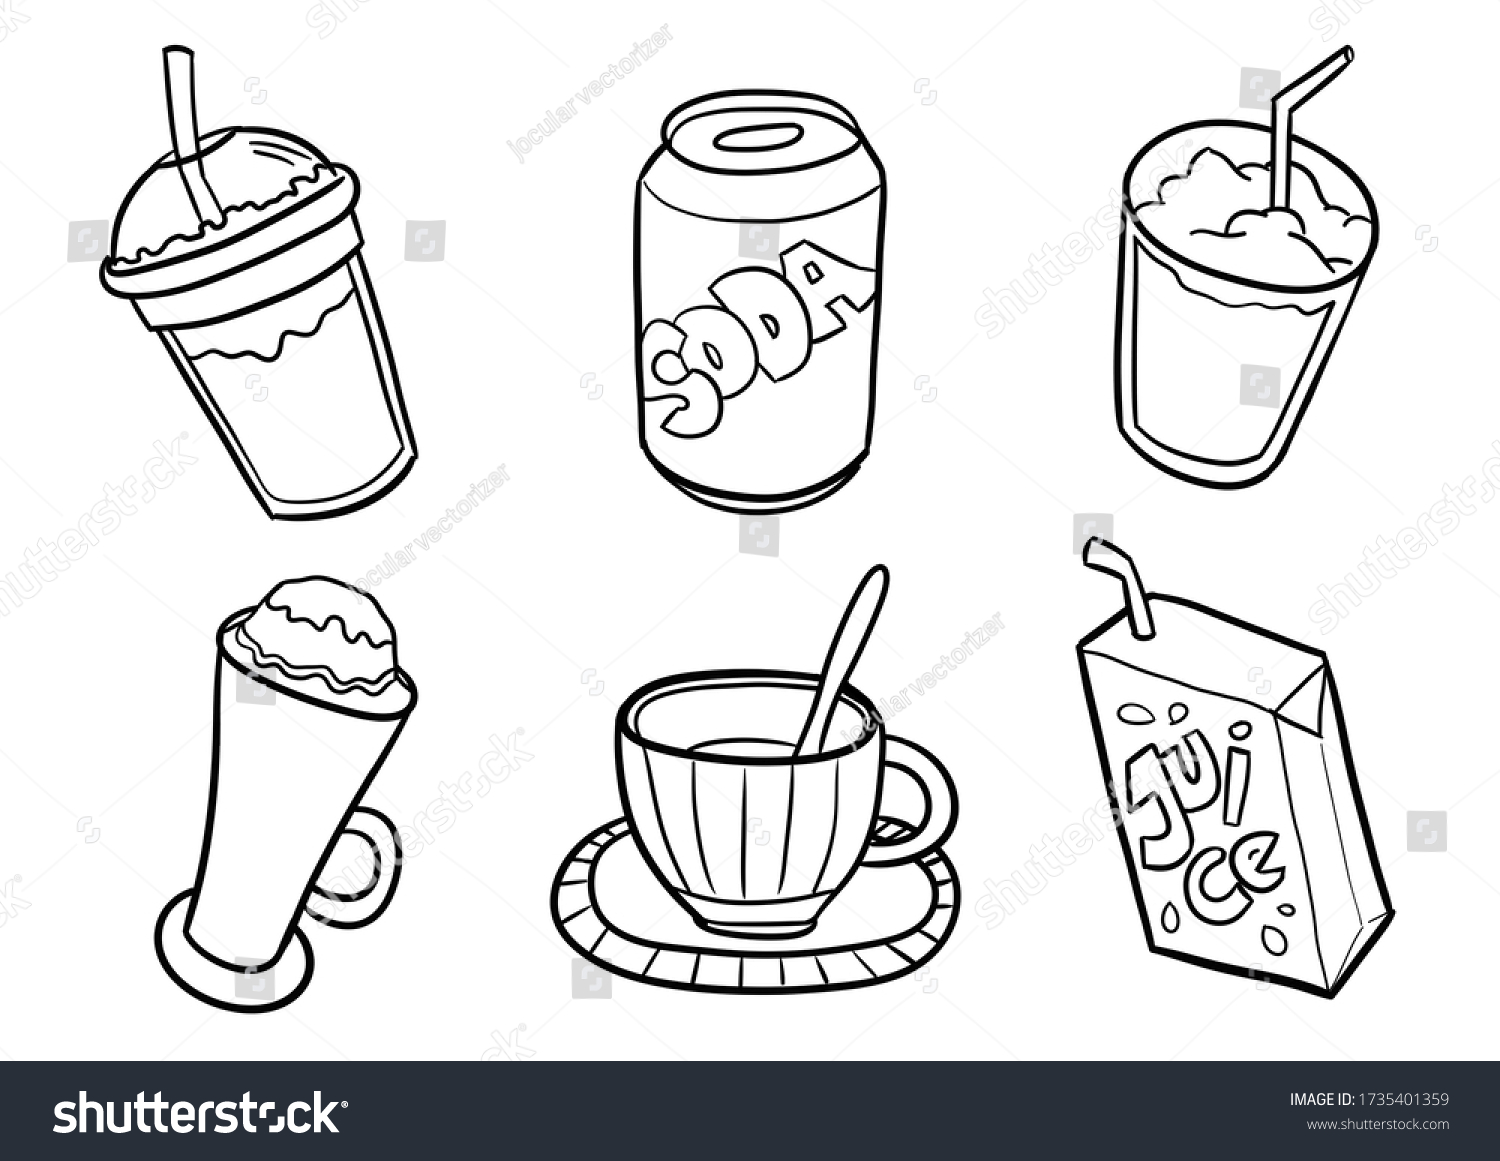 cute funny drinks coloring page kawaii stock illustration 1735401359 shutterstock